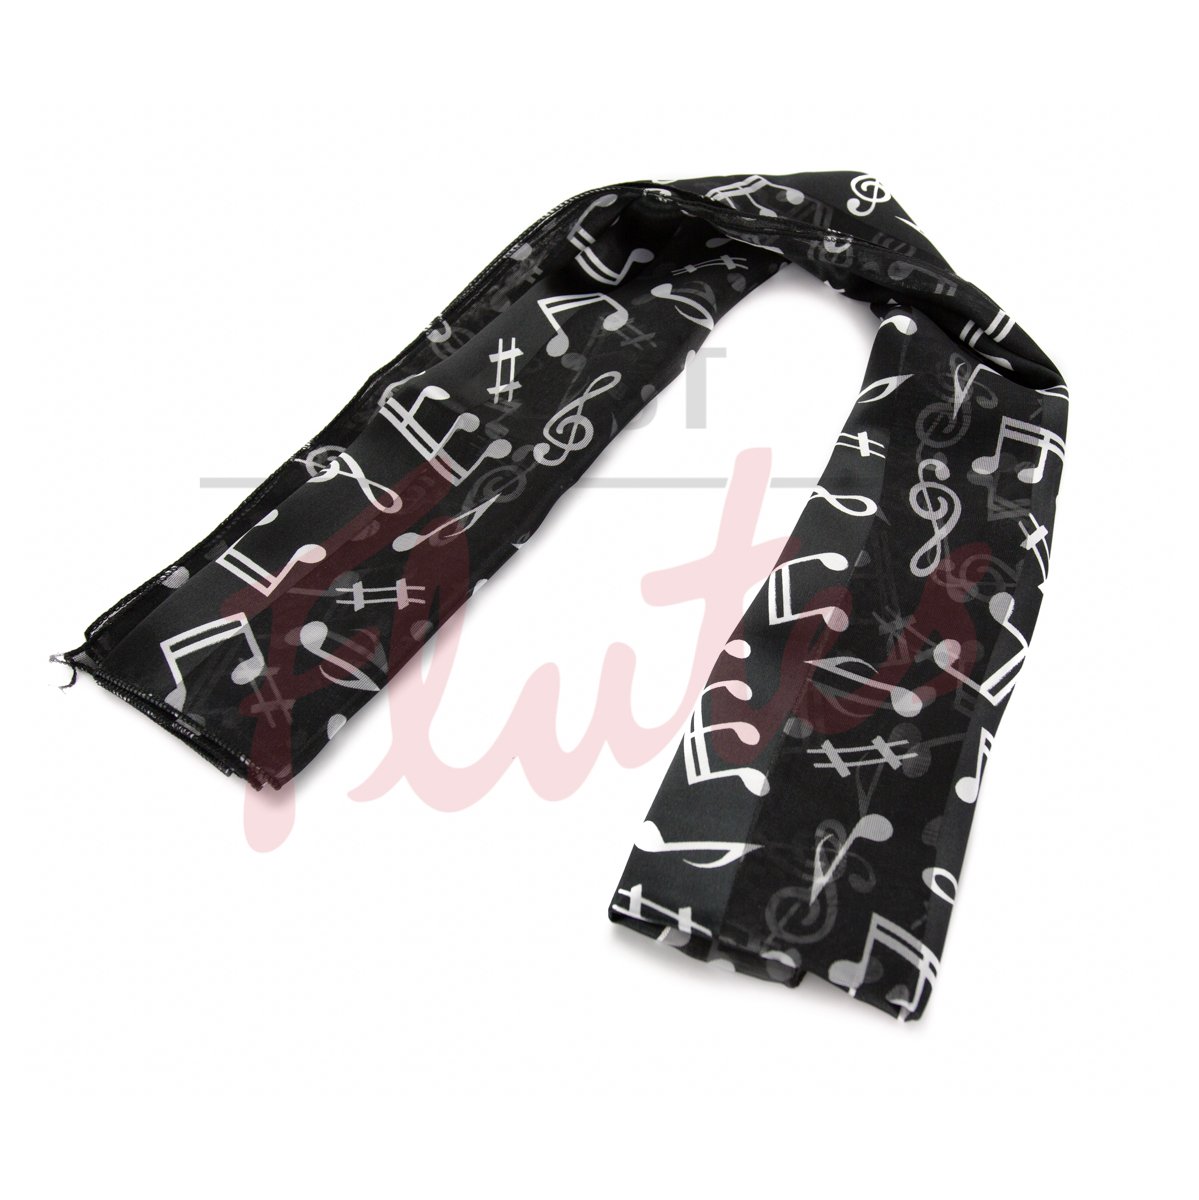 Music Scarf, Large Notes on Satin Stripes, Black with White Notes